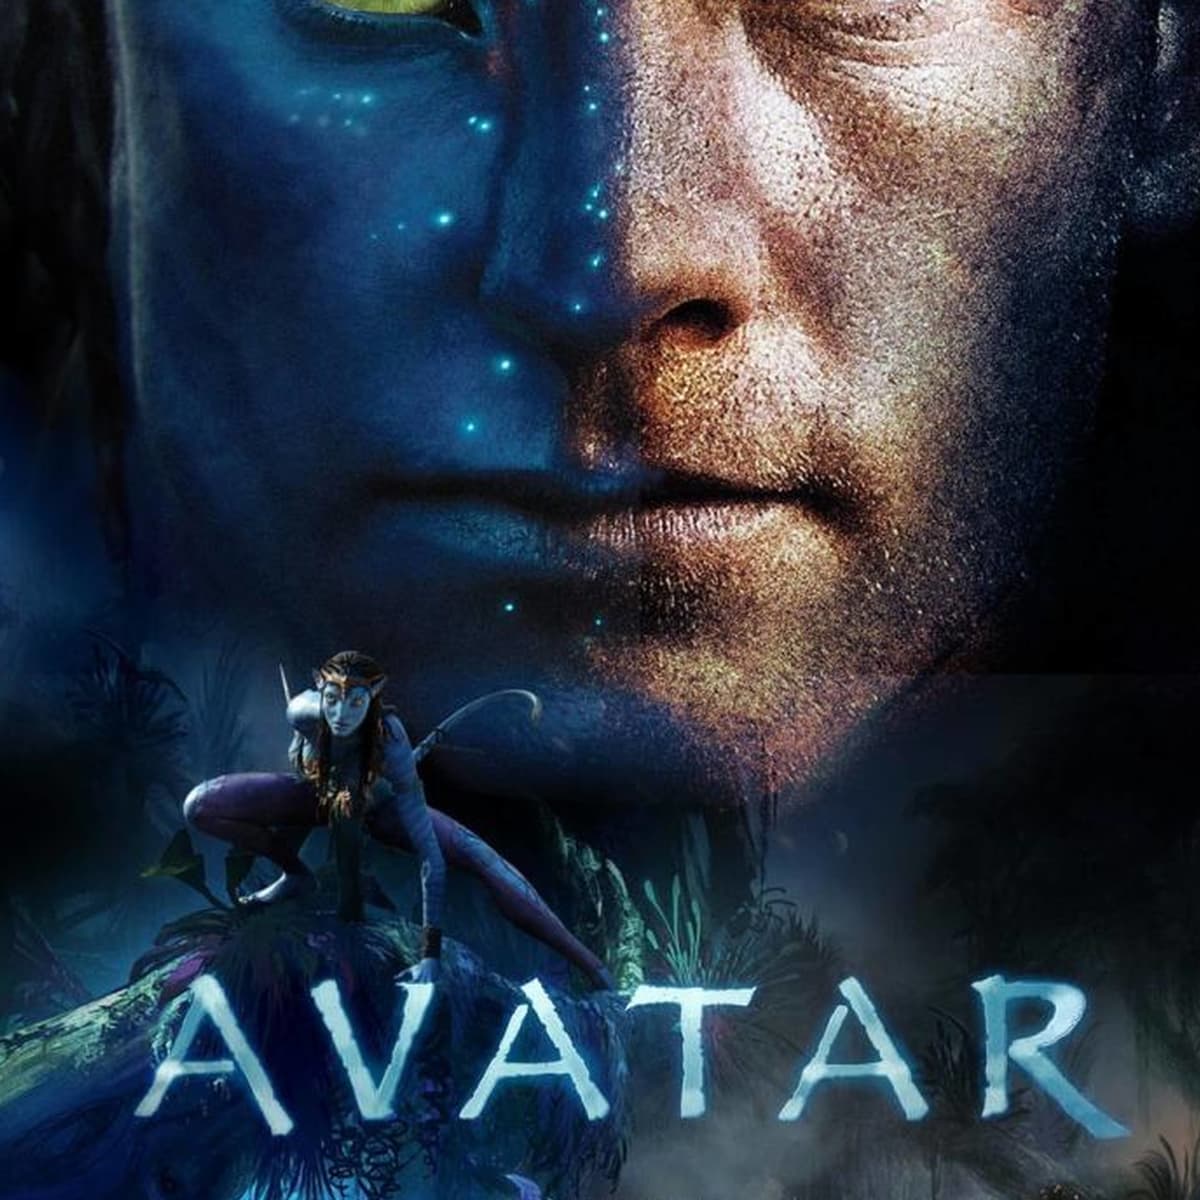 Movies Like Avatar The Way of Water Need to Be Celebrated  Den of Geek